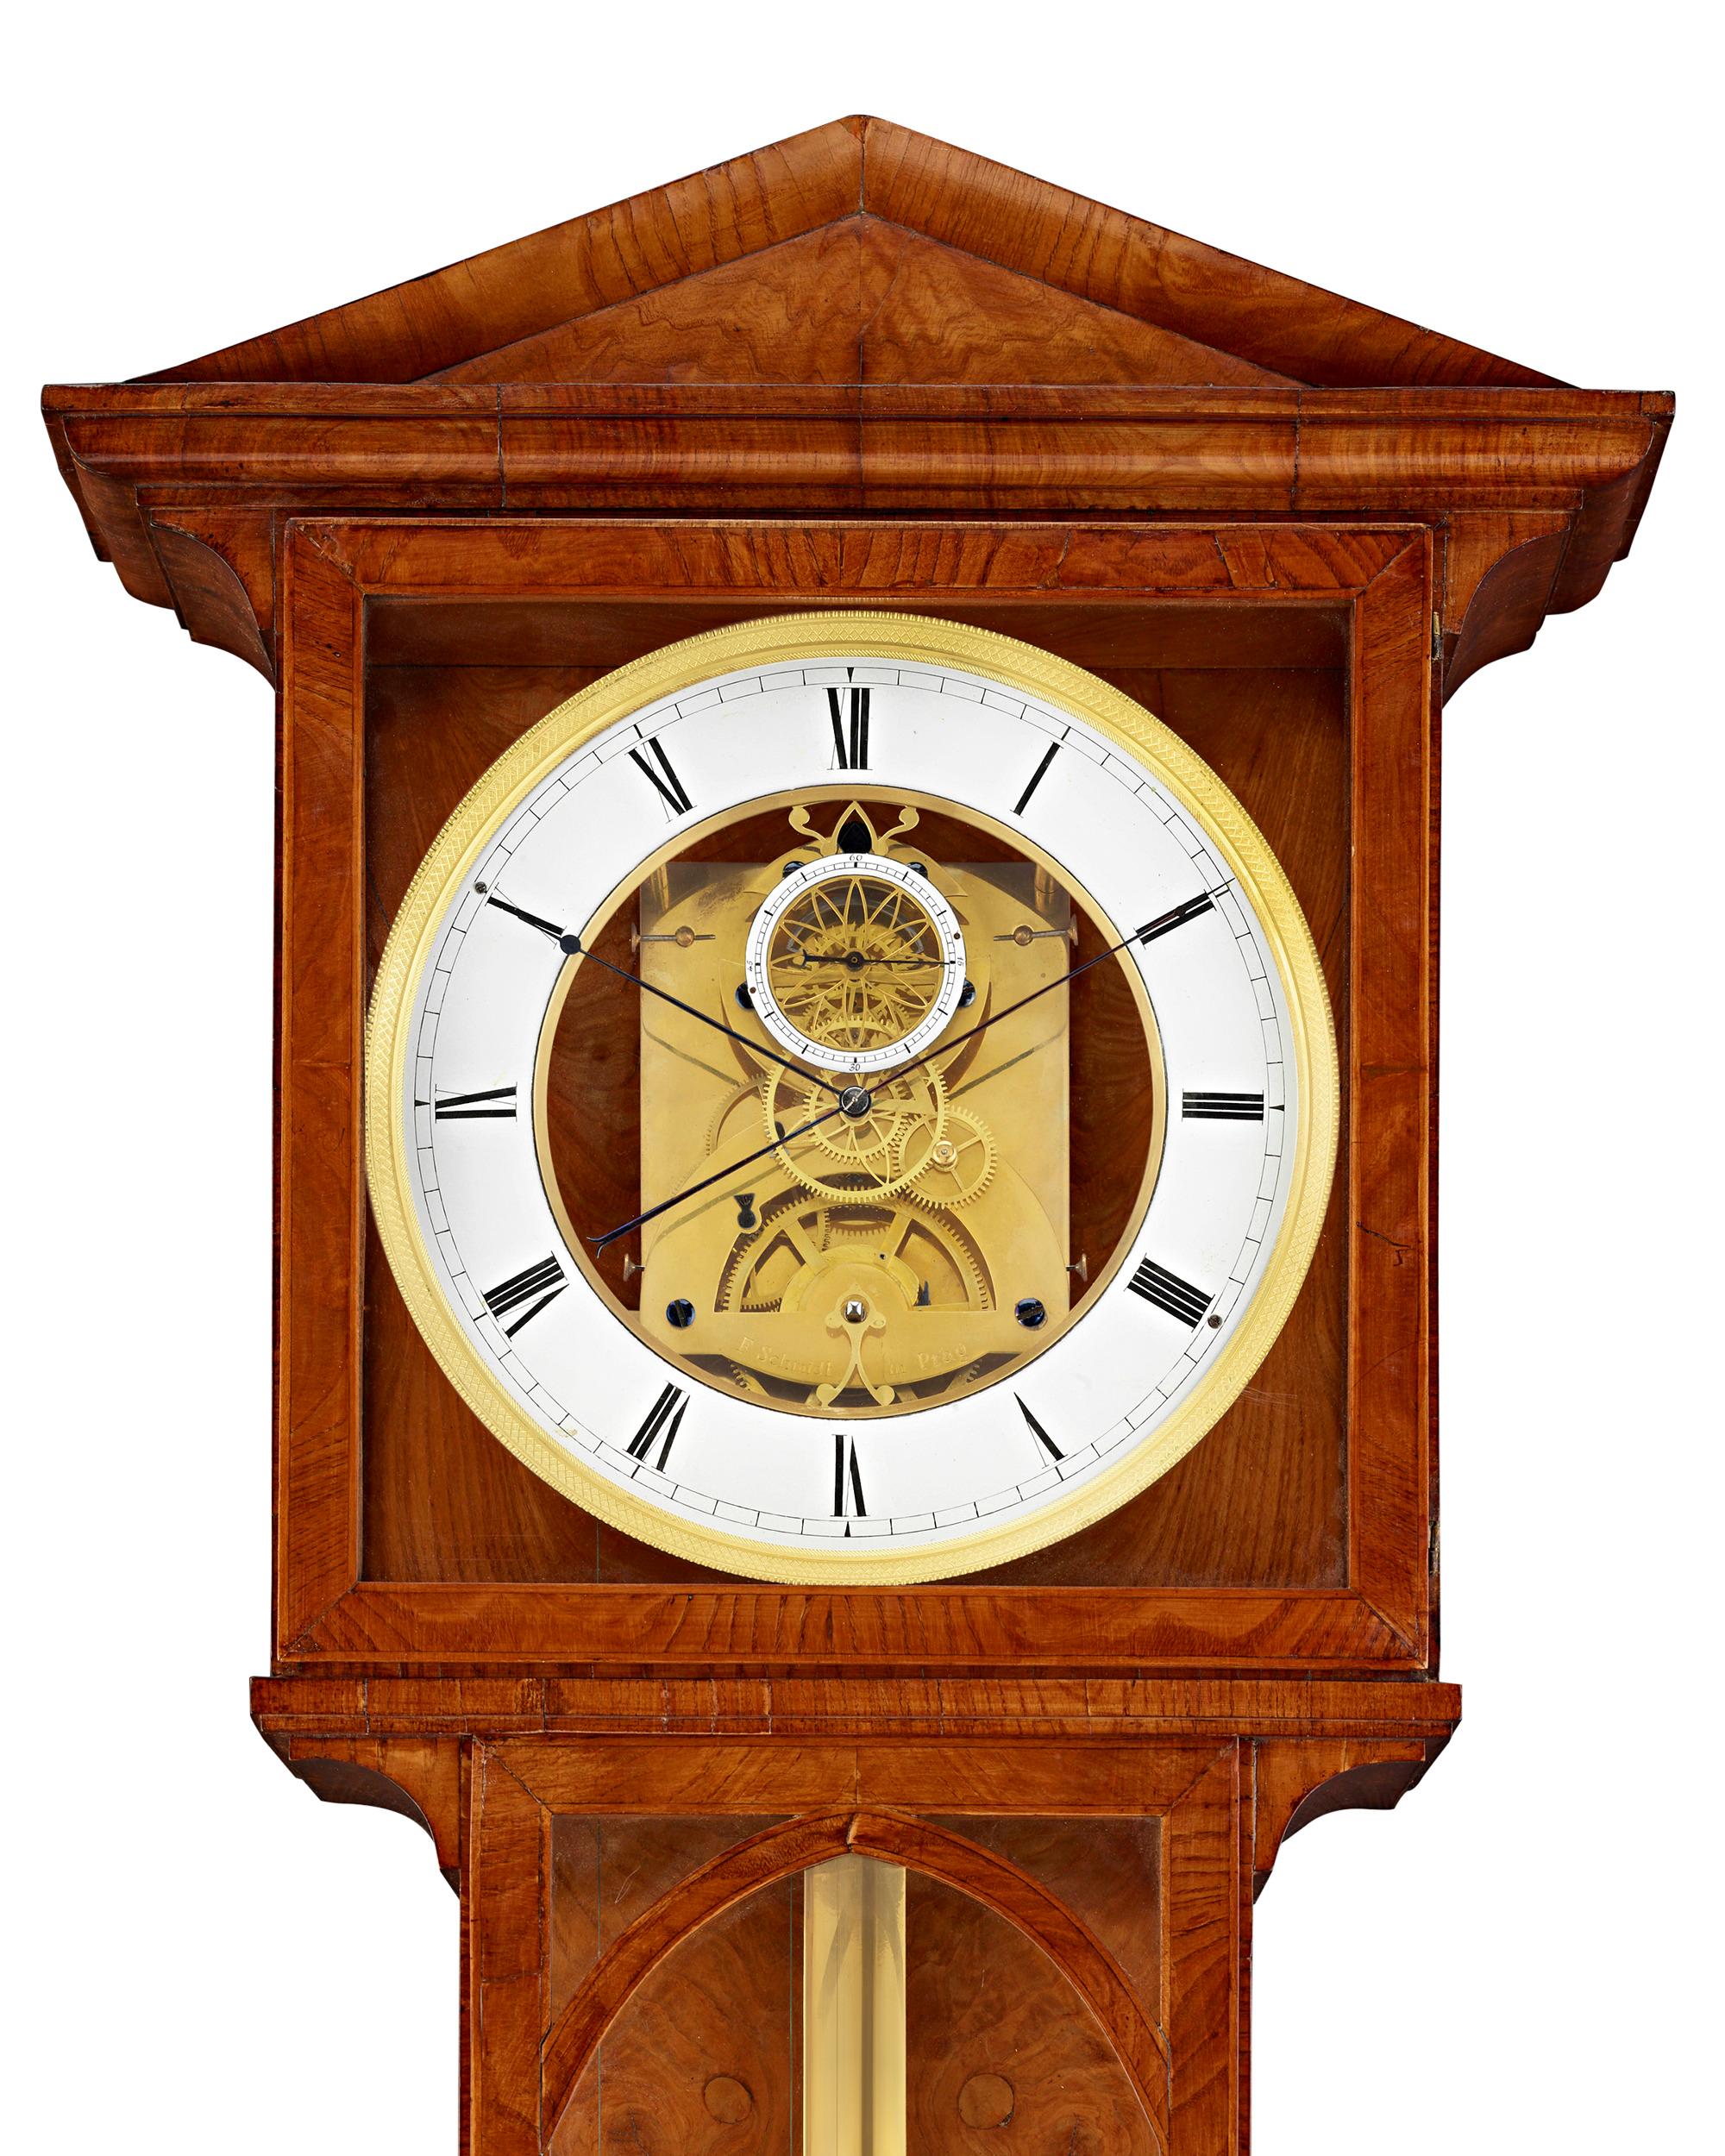 This rare year-going regulator clock, or Laterndluhr, beautifully demonstrates the heights of precision clockmaking. The ash-veneered Biedermeier case houses a weight-driven precision mechanism, as well as a skeletonized center dial that allows one